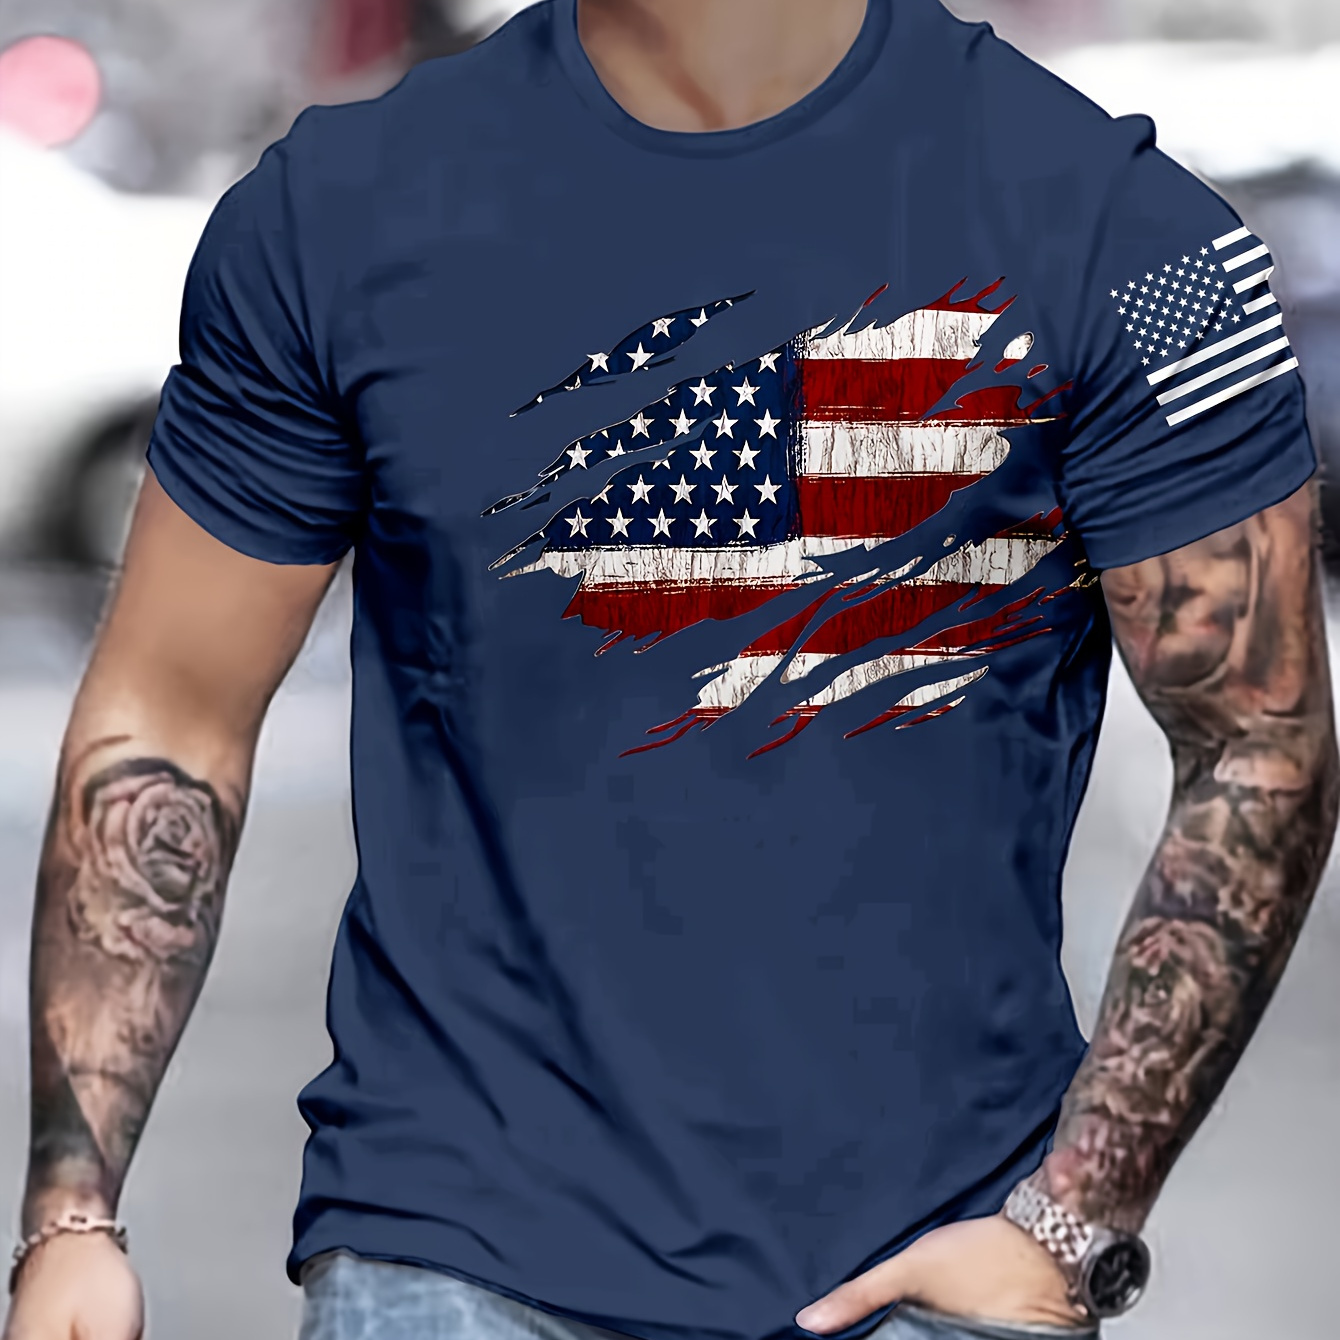 

Men's Flag Graphic Print T-shirt, Casual Short Sleeve Crew Neck Tee, Men's Clothing For Summer Outdoor